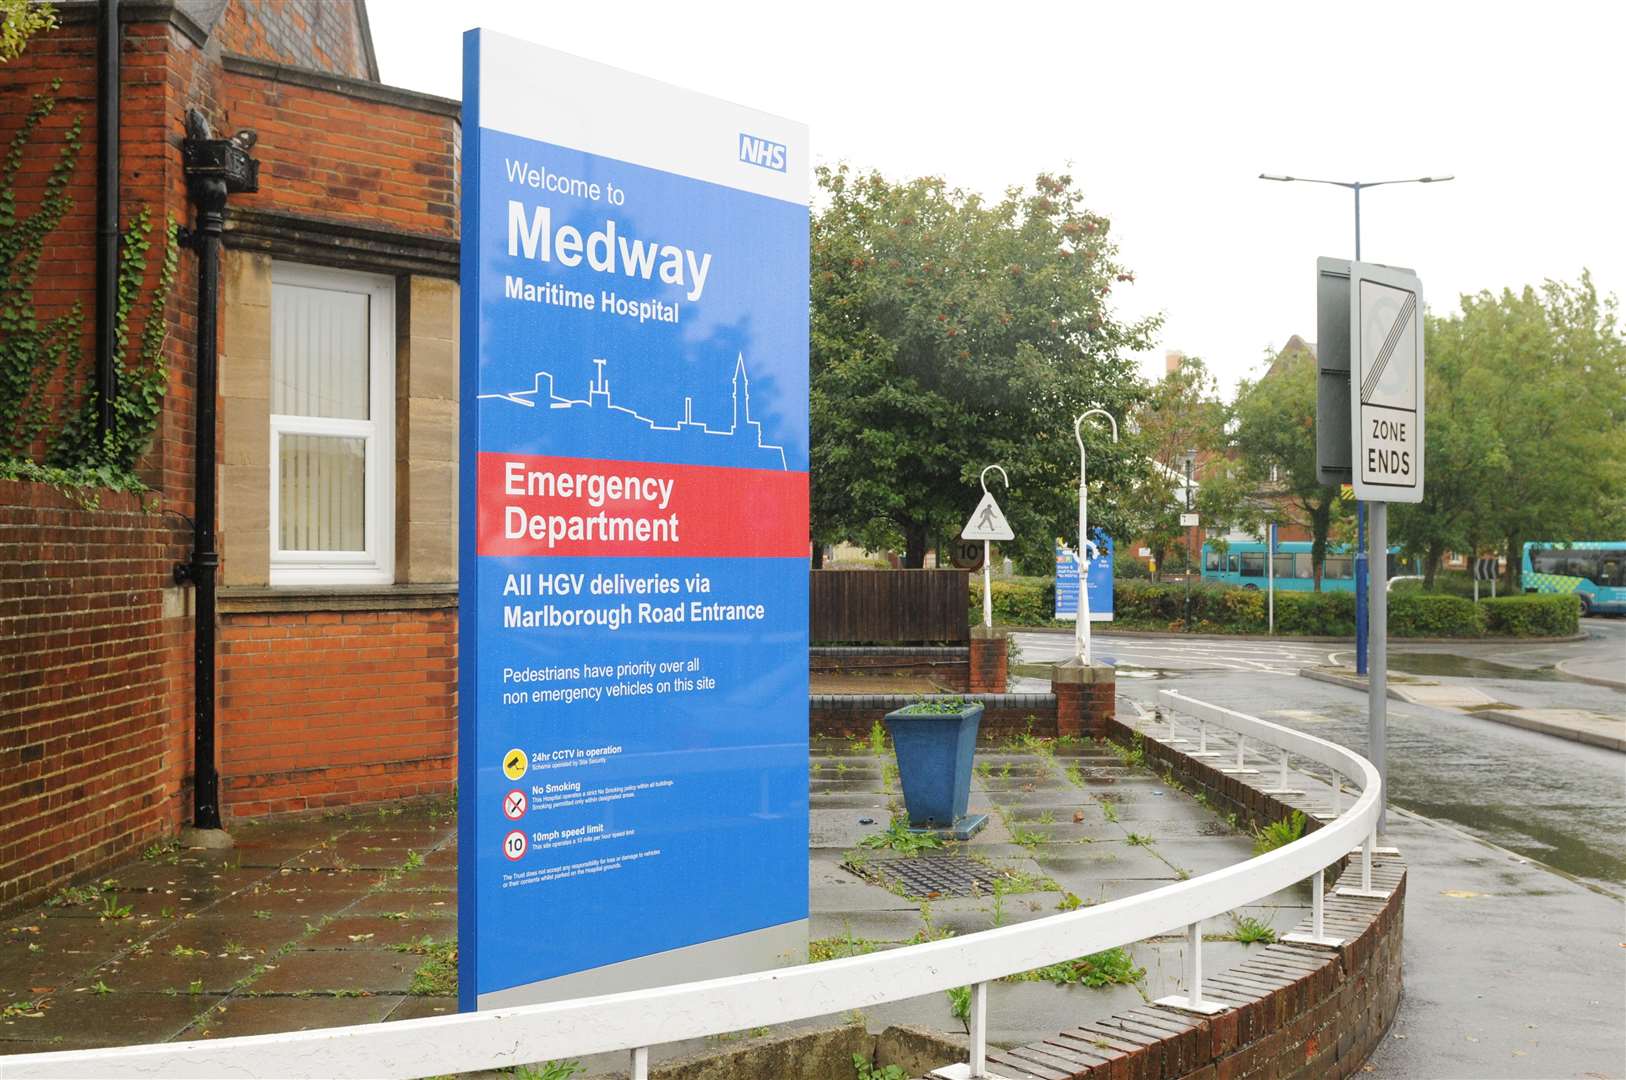 Mr Webdale has filed a formal complaint to Medway hospital which says it will be investigating